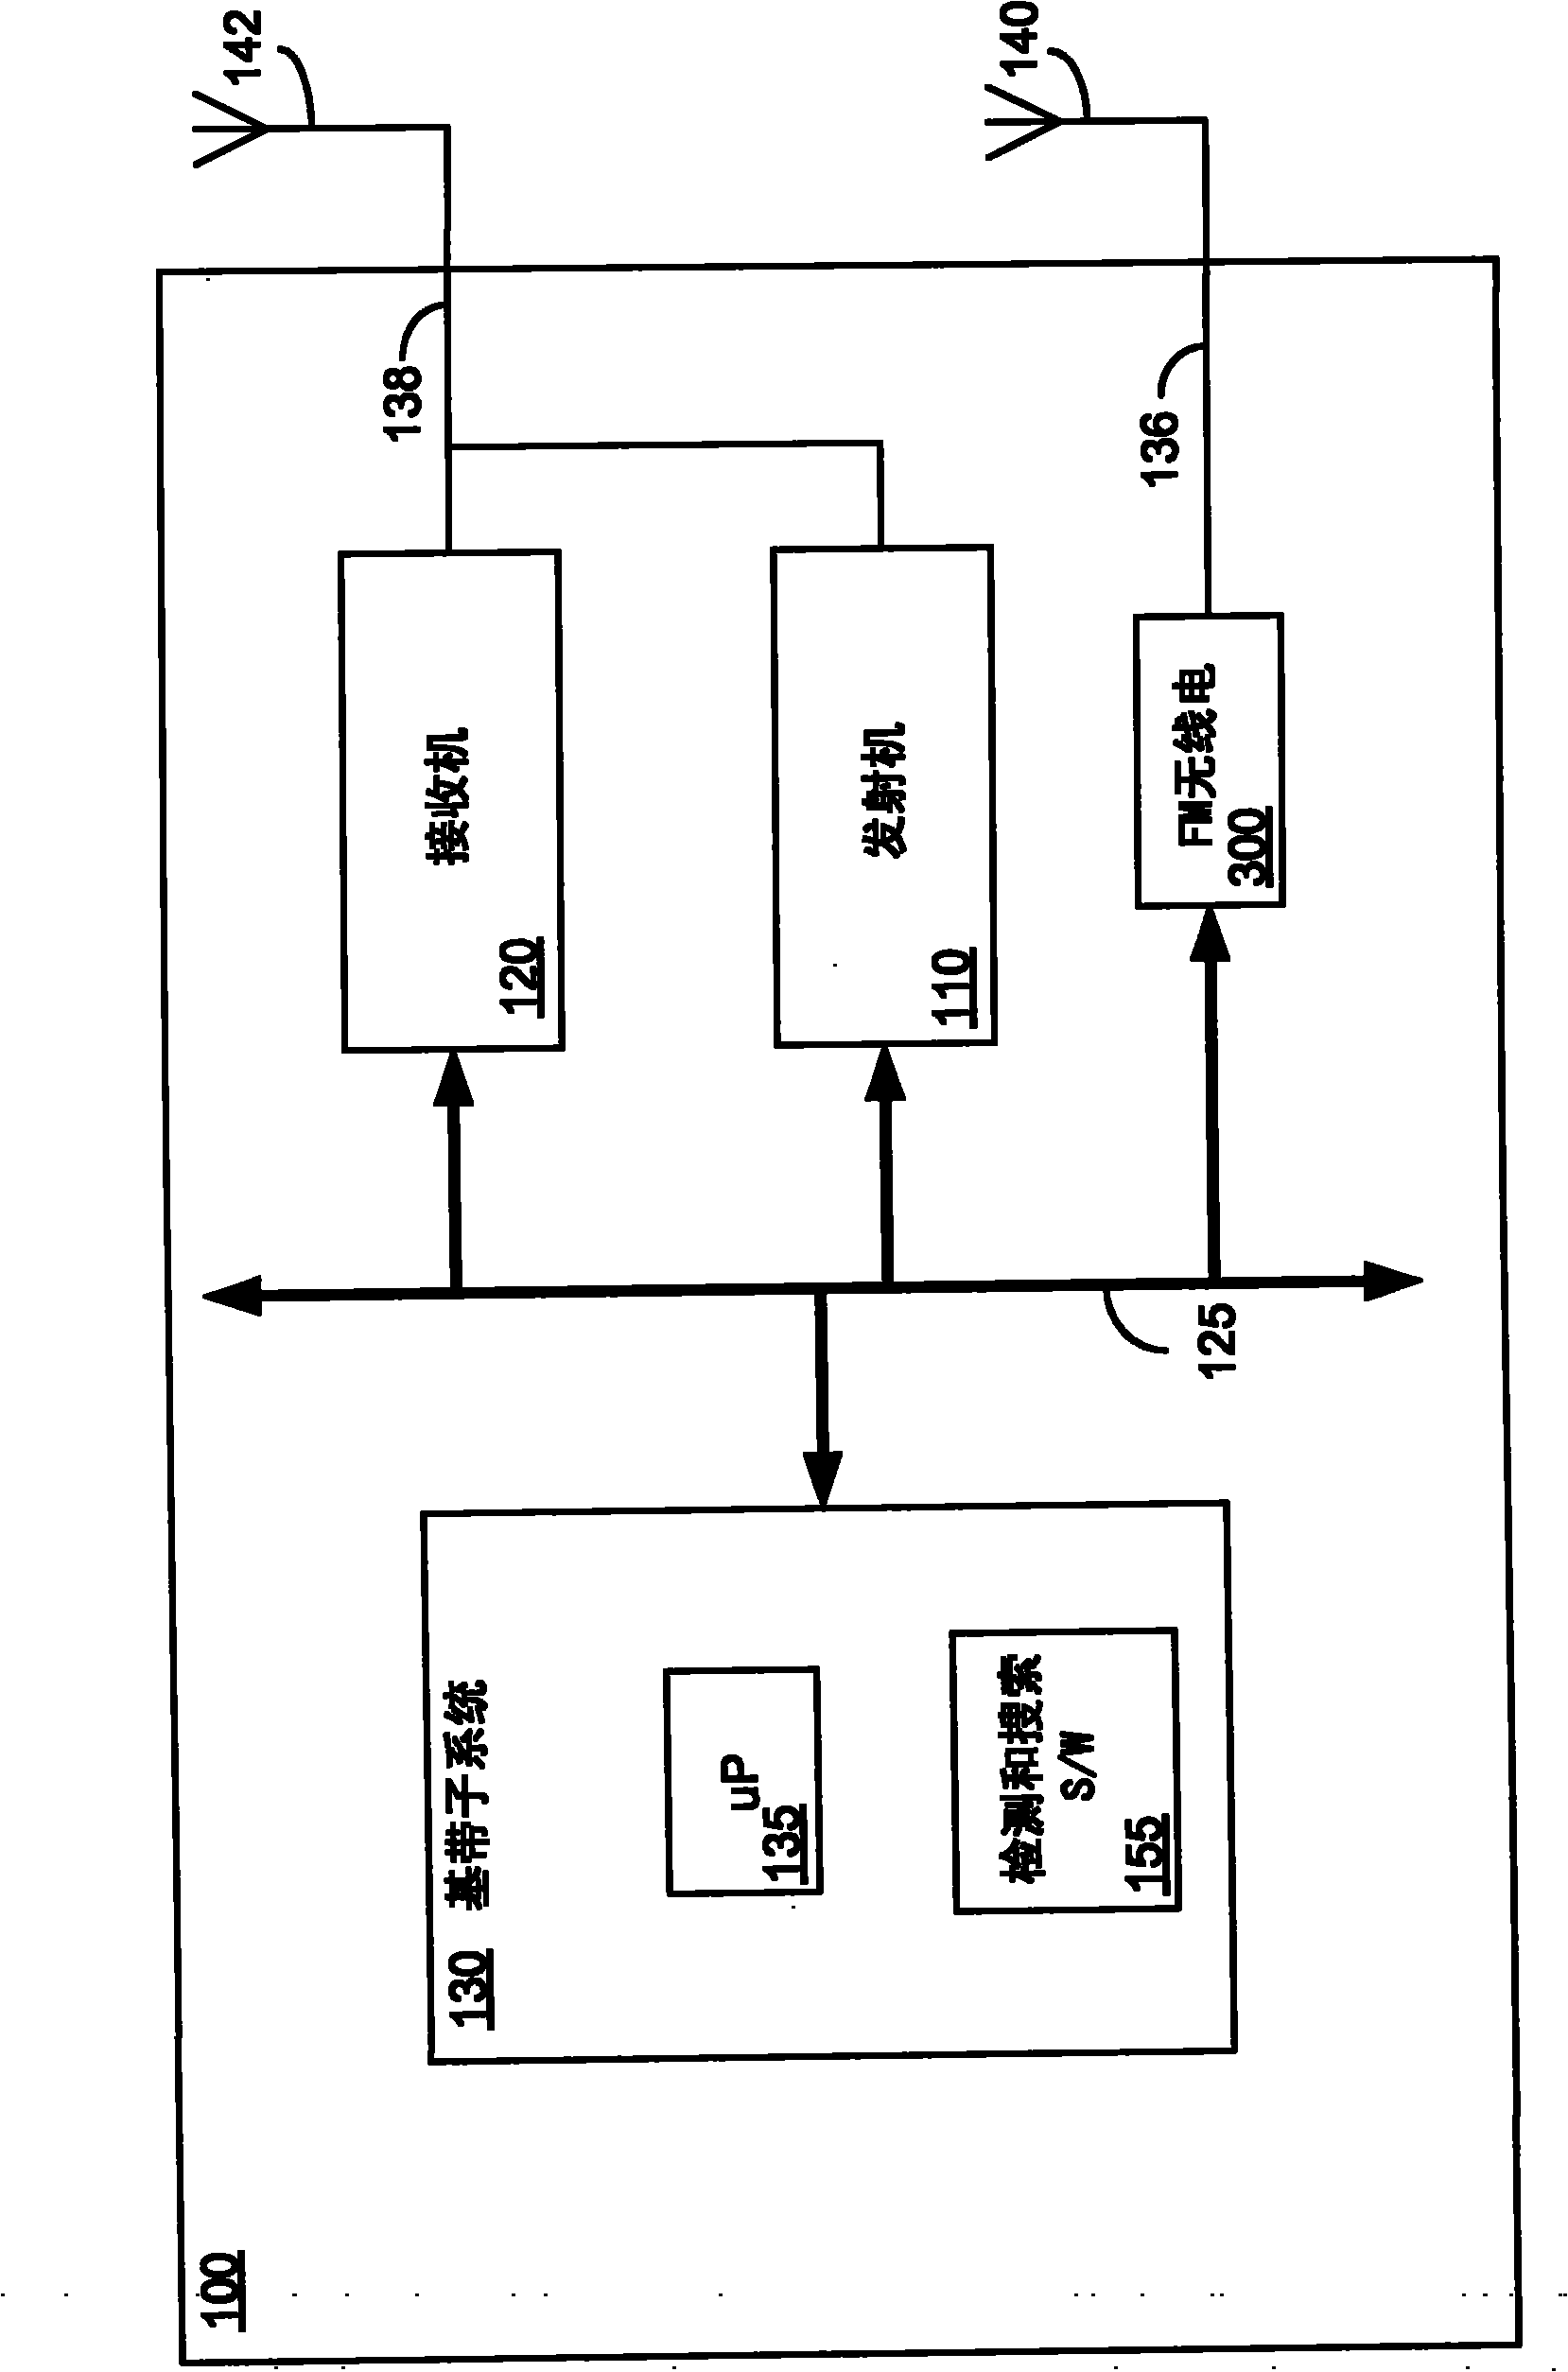 System and method for station detection and seek in a radio receiver